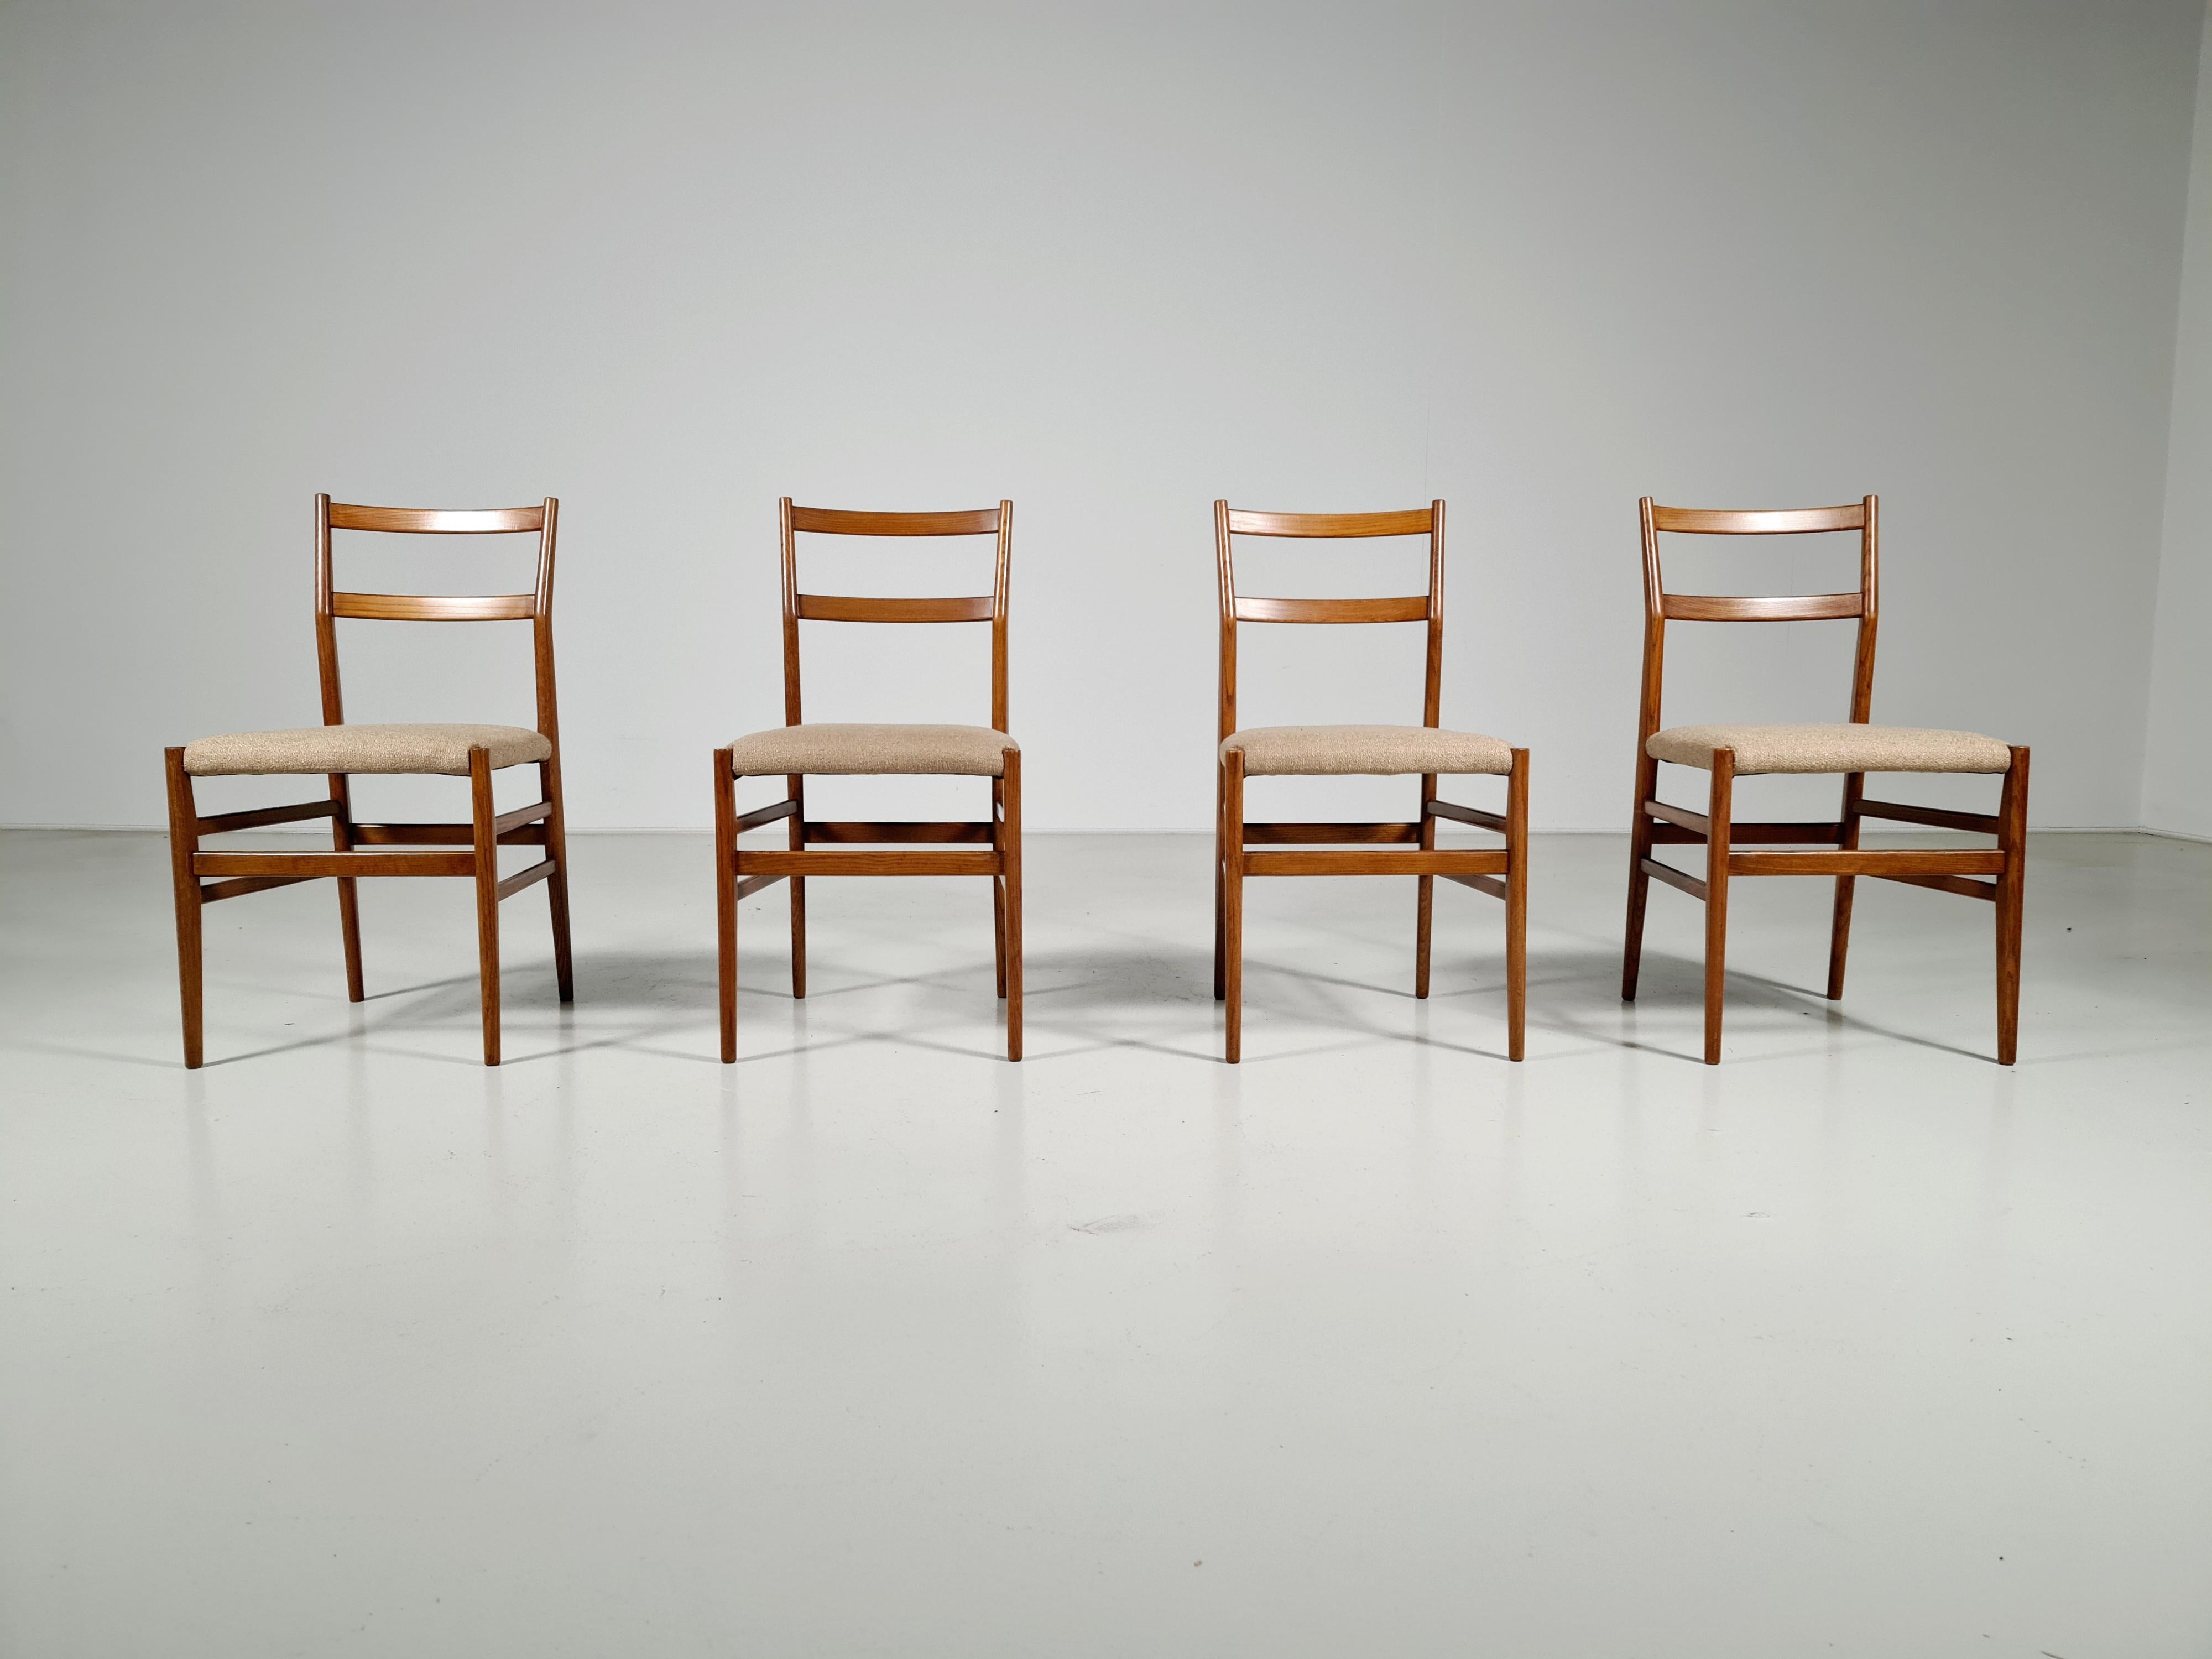 Leggera 646 chair, Gio Ponti, Italy

Set of four chairs model “Leggera 646” designed by Gio Ponti and made by Cassina. Made of solid ashwood structure with seat reupholstered in a chenille boucle.

The Leggera was a predecessor of the